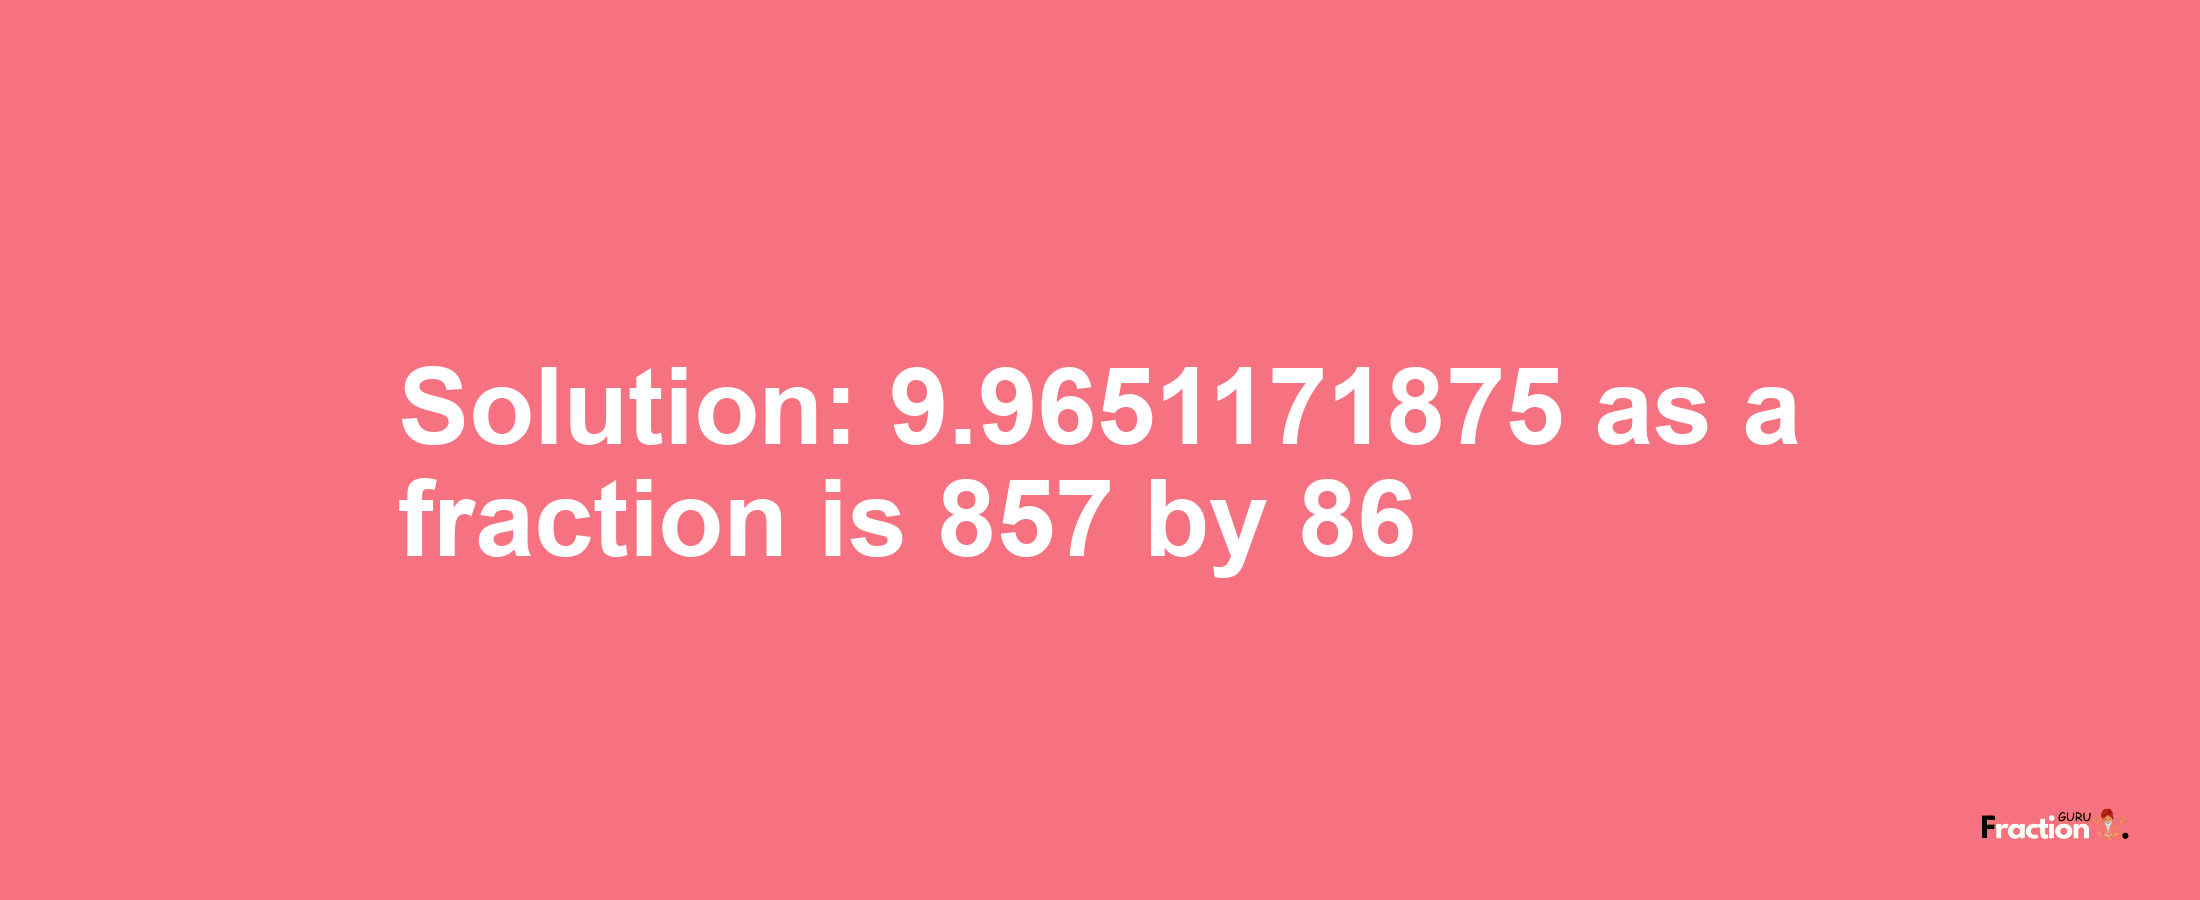 Solution:9.9651171875 as a fraction is 857/86